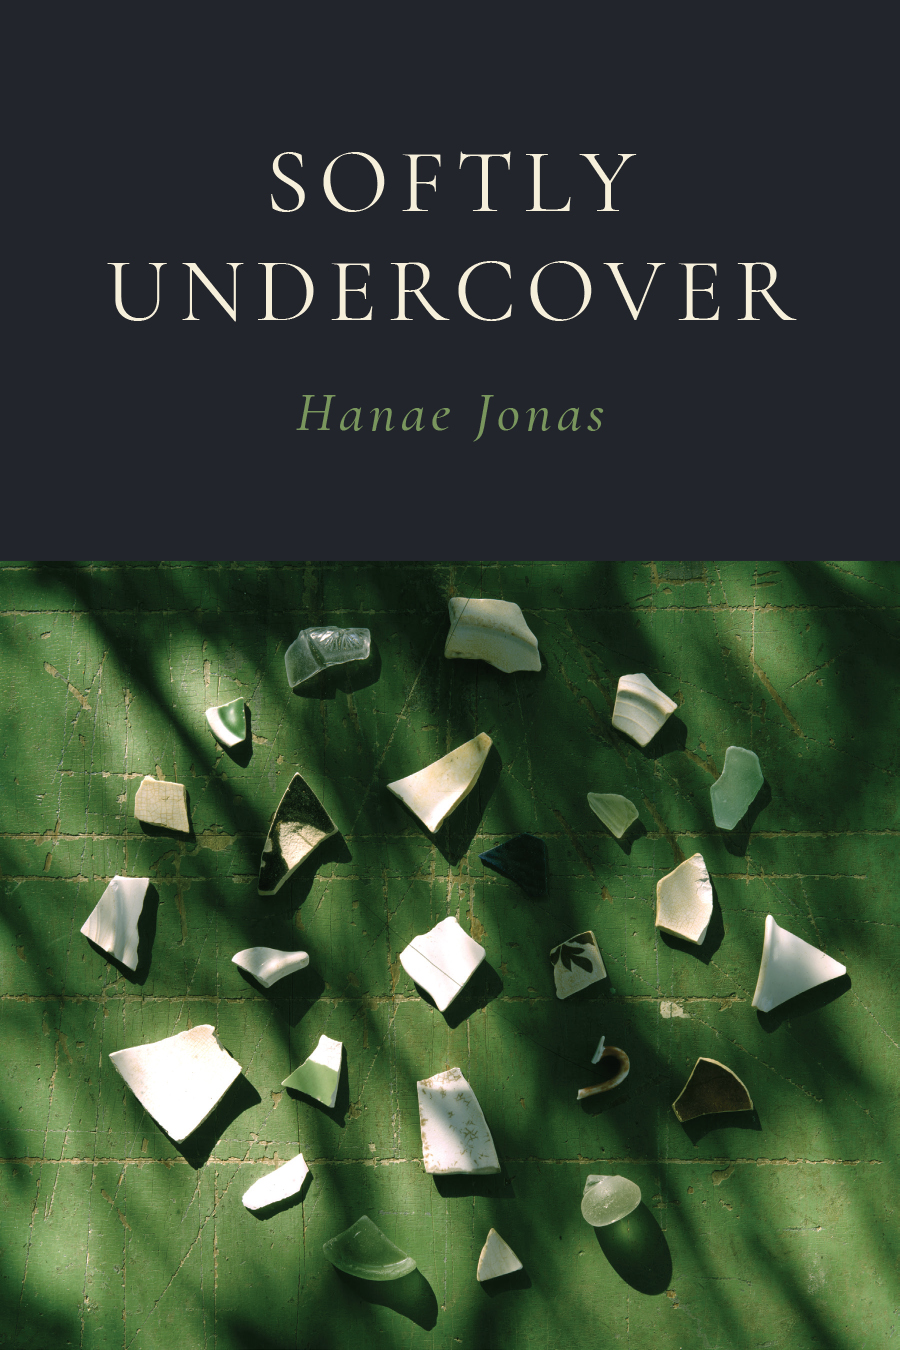 Front cover of Softly Undercover, by Hanae Jonas, featuring an image of light-colored pottery shards arranged in concentric circles on a green background with shadows.